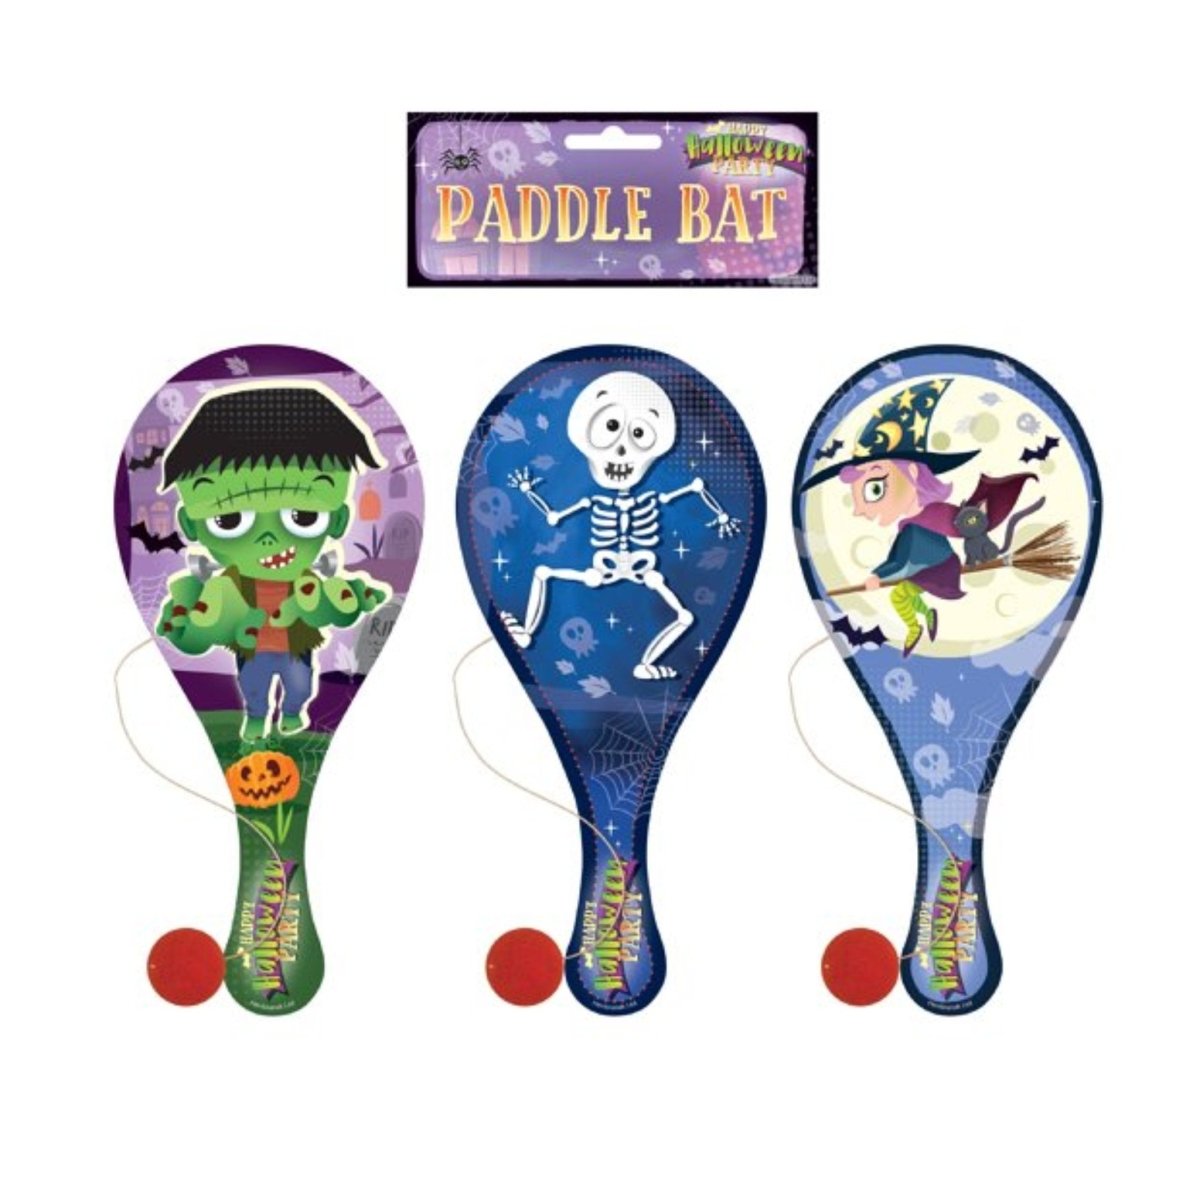 Wooden Halloween Paddle Bat and Ball Games (22cm) - Kids Party Craft